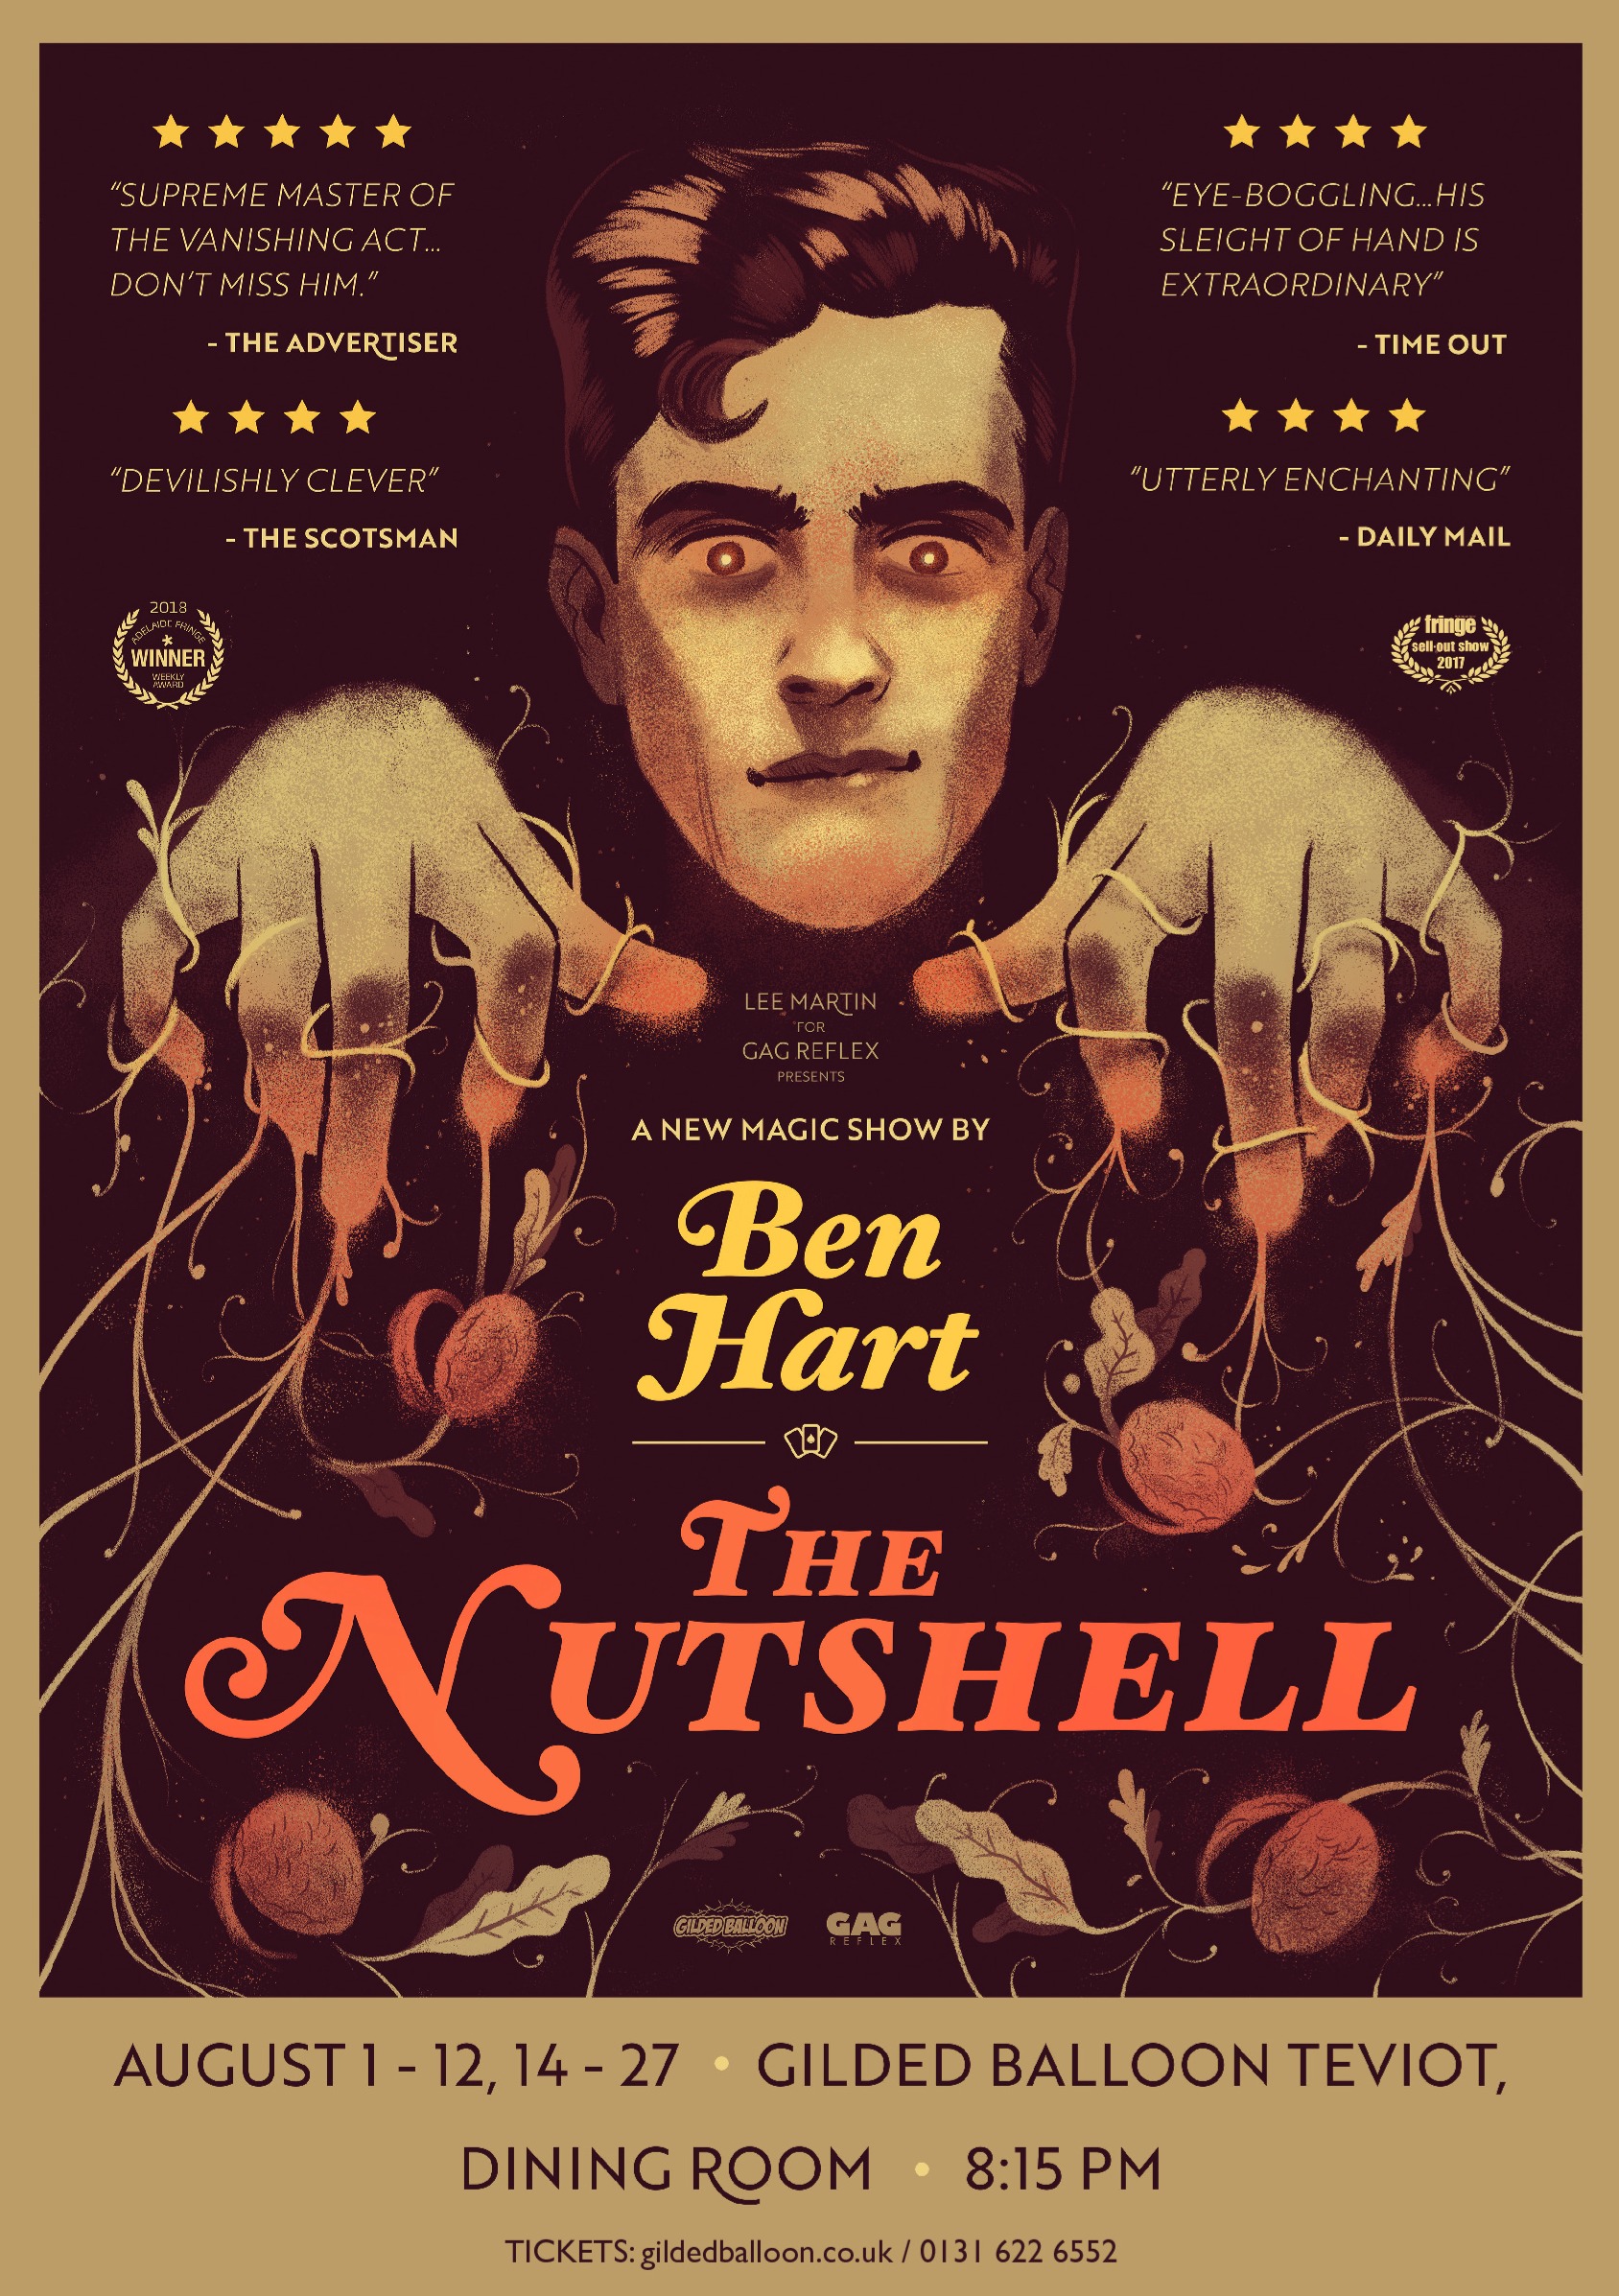 The poster for Ben Hart: The Nutshell